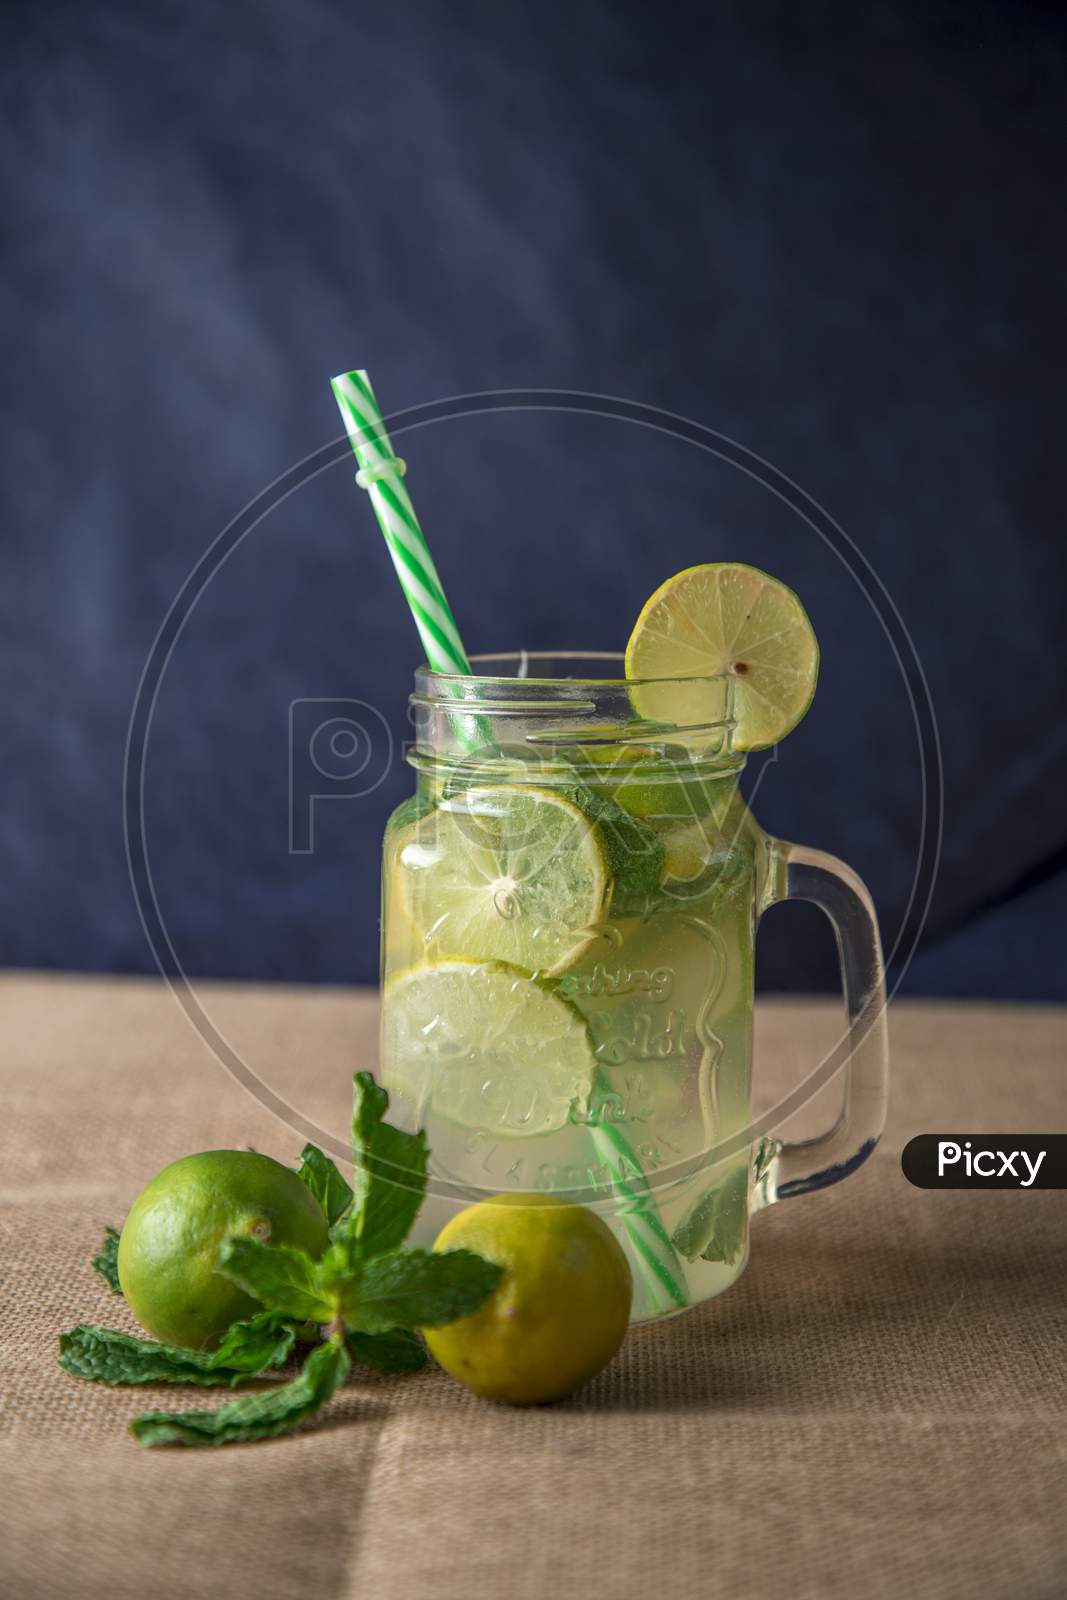 Lemon Juice Is a Traditional Summer Cooler Beverage Served  In Glass  On White Background